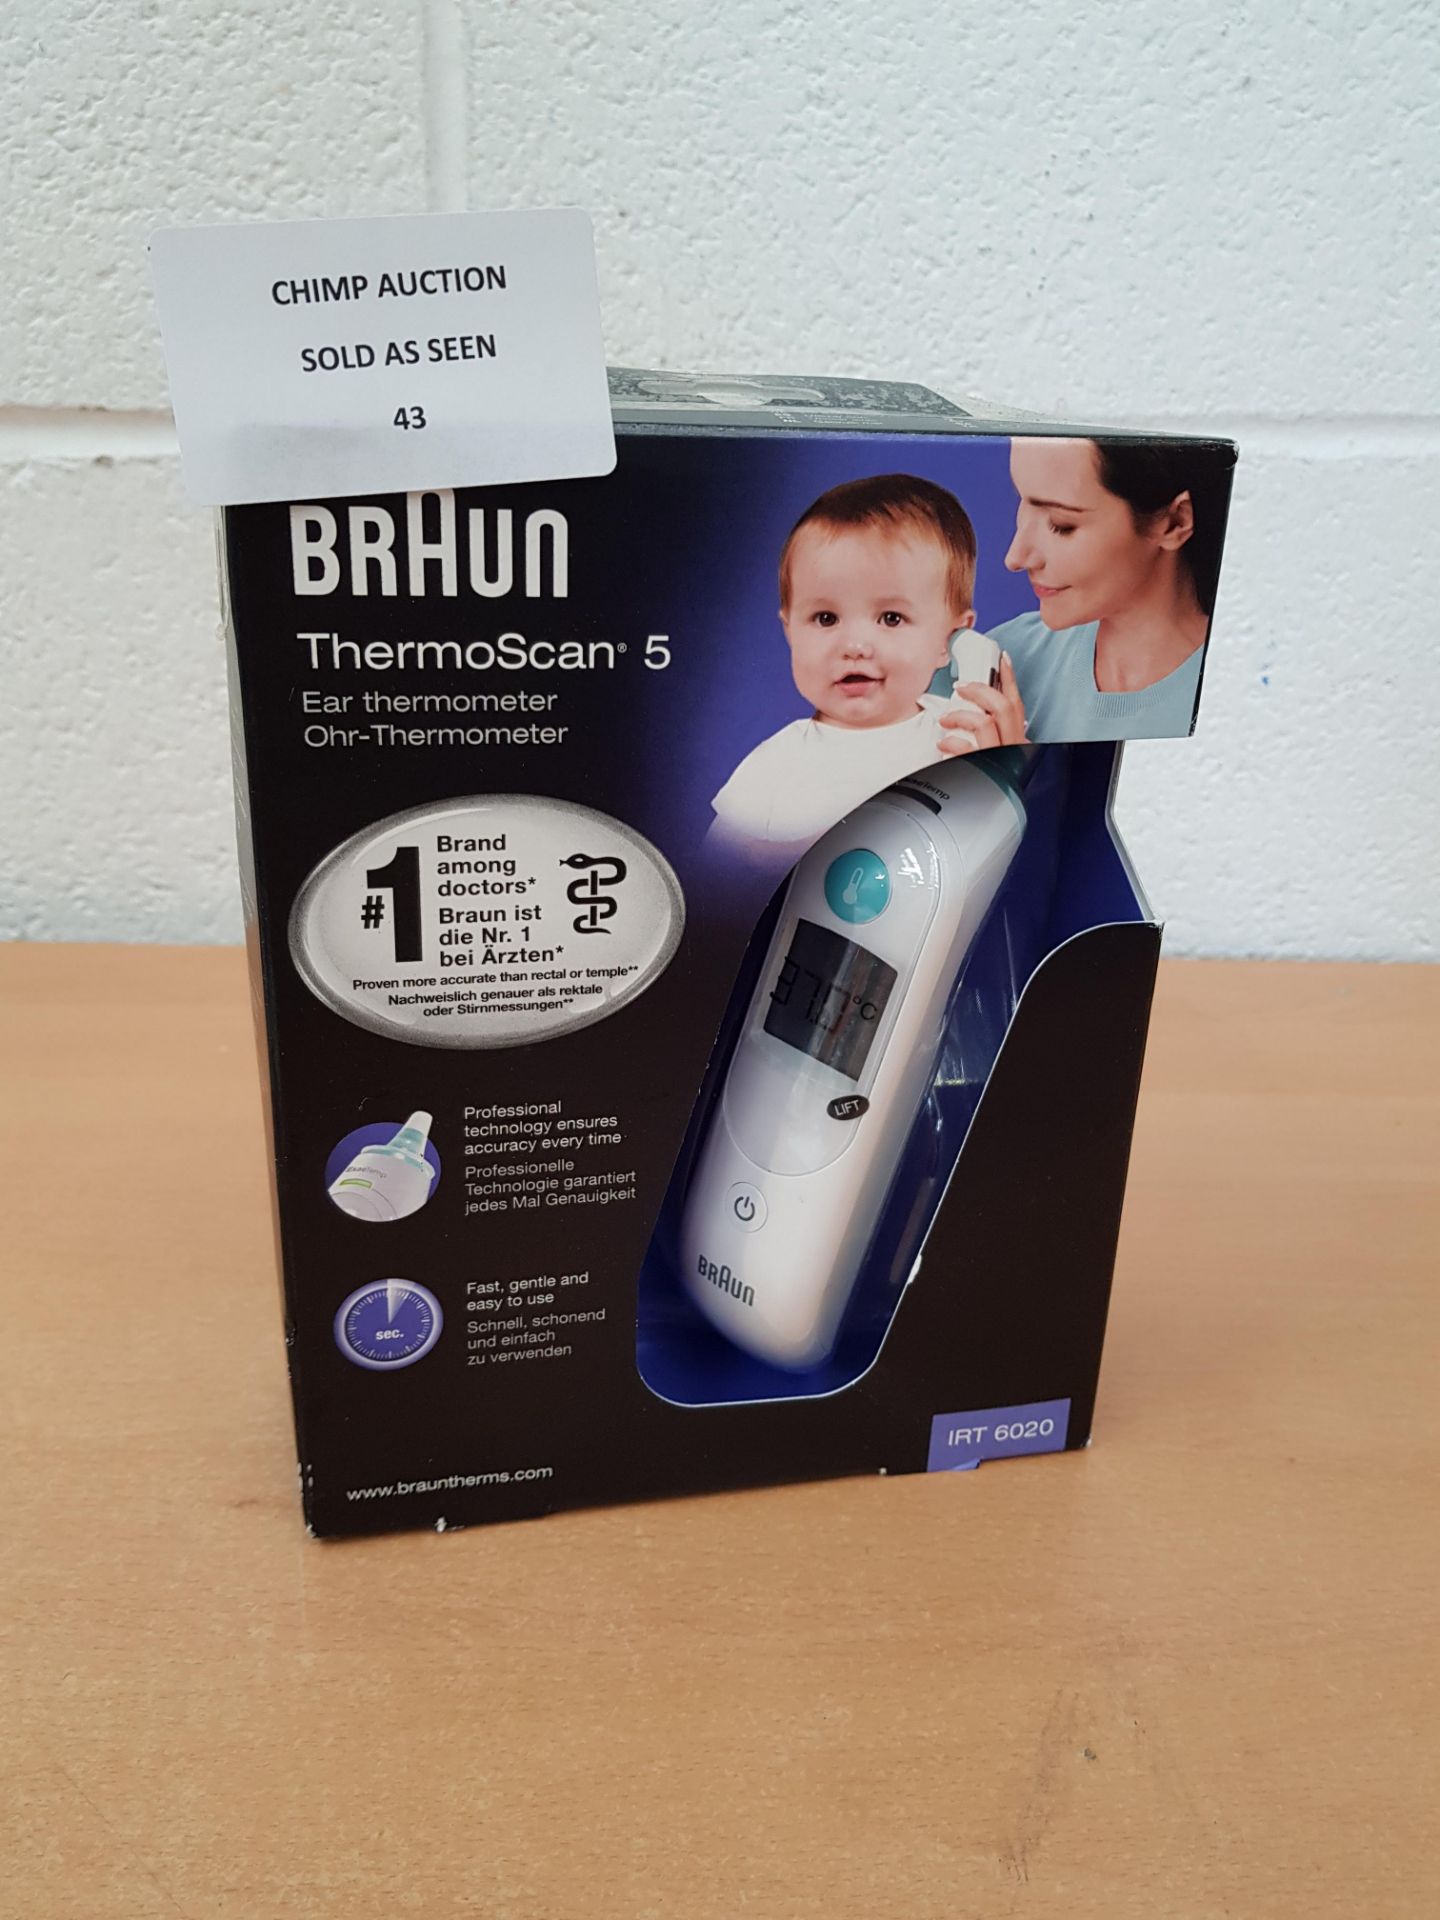 Braun IRT 6020 ThermoScan 5 Ear Thermometer